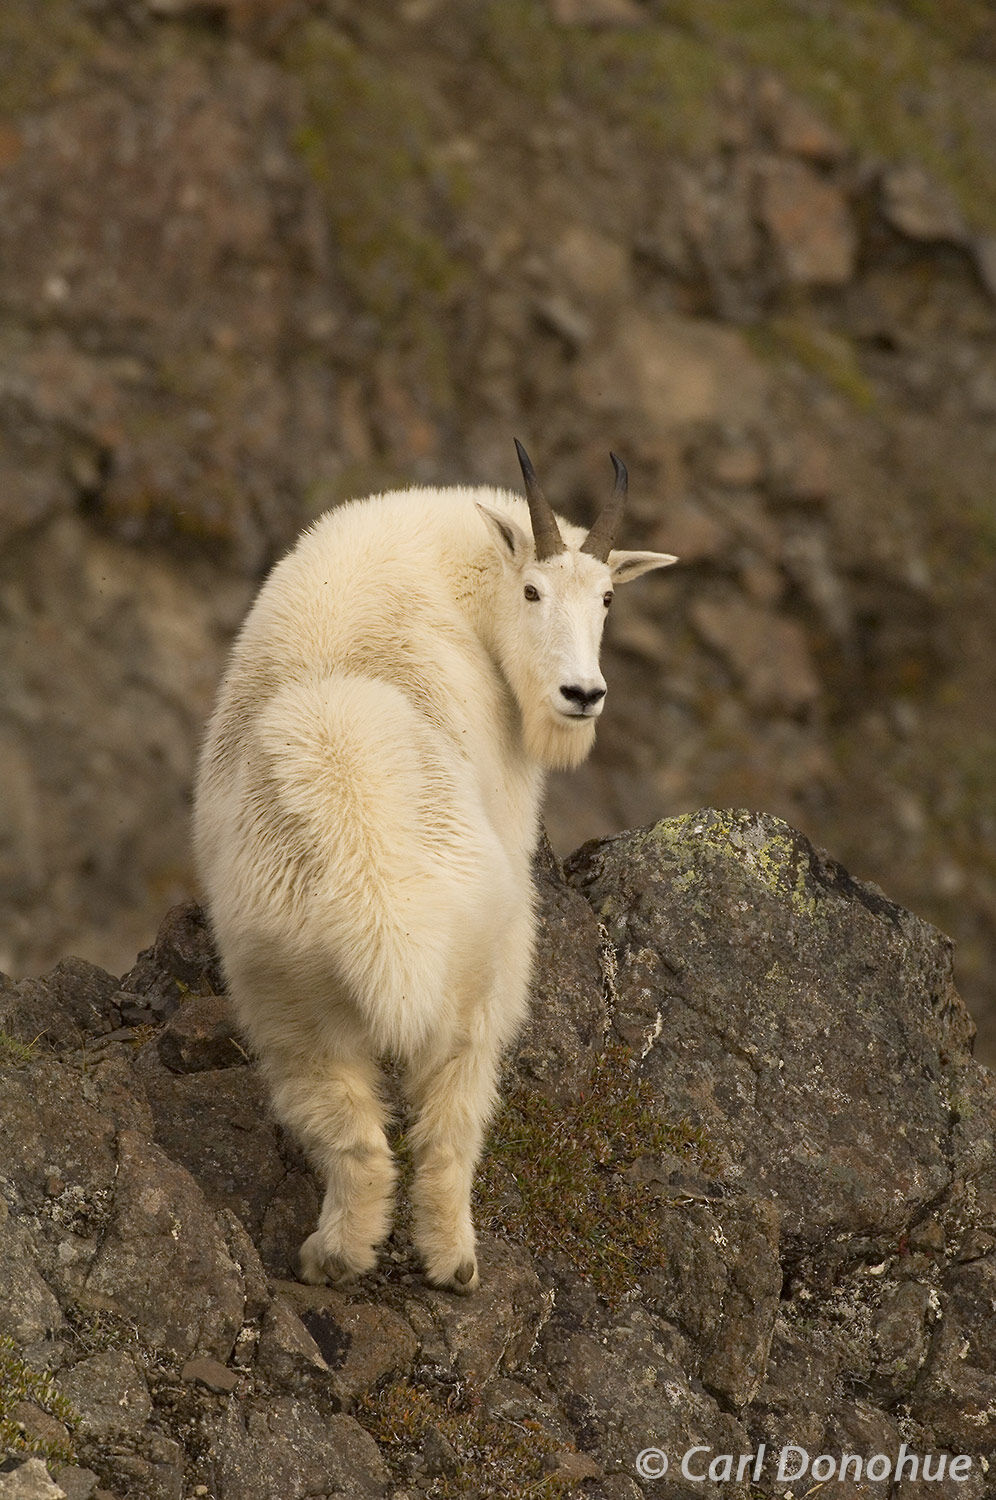 The powerful muscles of the mountain goat are put to the test as it navigates the steep and rocky terrain of Wrangell-St. Elias...